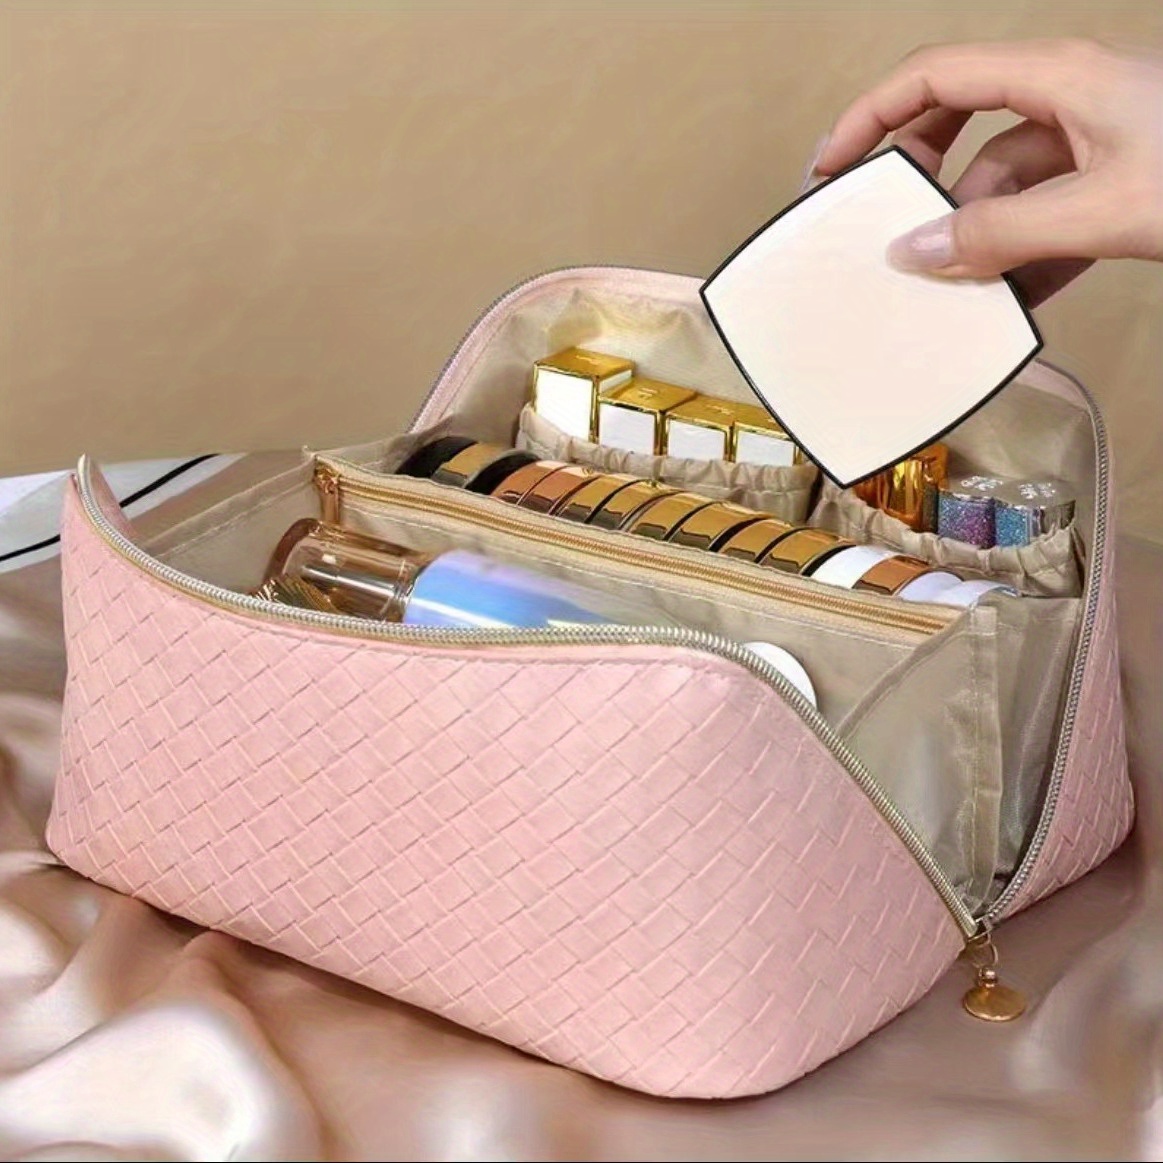  Makeup Bag - Large Capacity Travel Cosmetic Bag for Women,  Multifunctional Open Flat Toiletry Bag with Handle, Washable Waterproof  Beauty Zipper Makeup Organizer PU Leather, Pink : Beauty & Personal Care